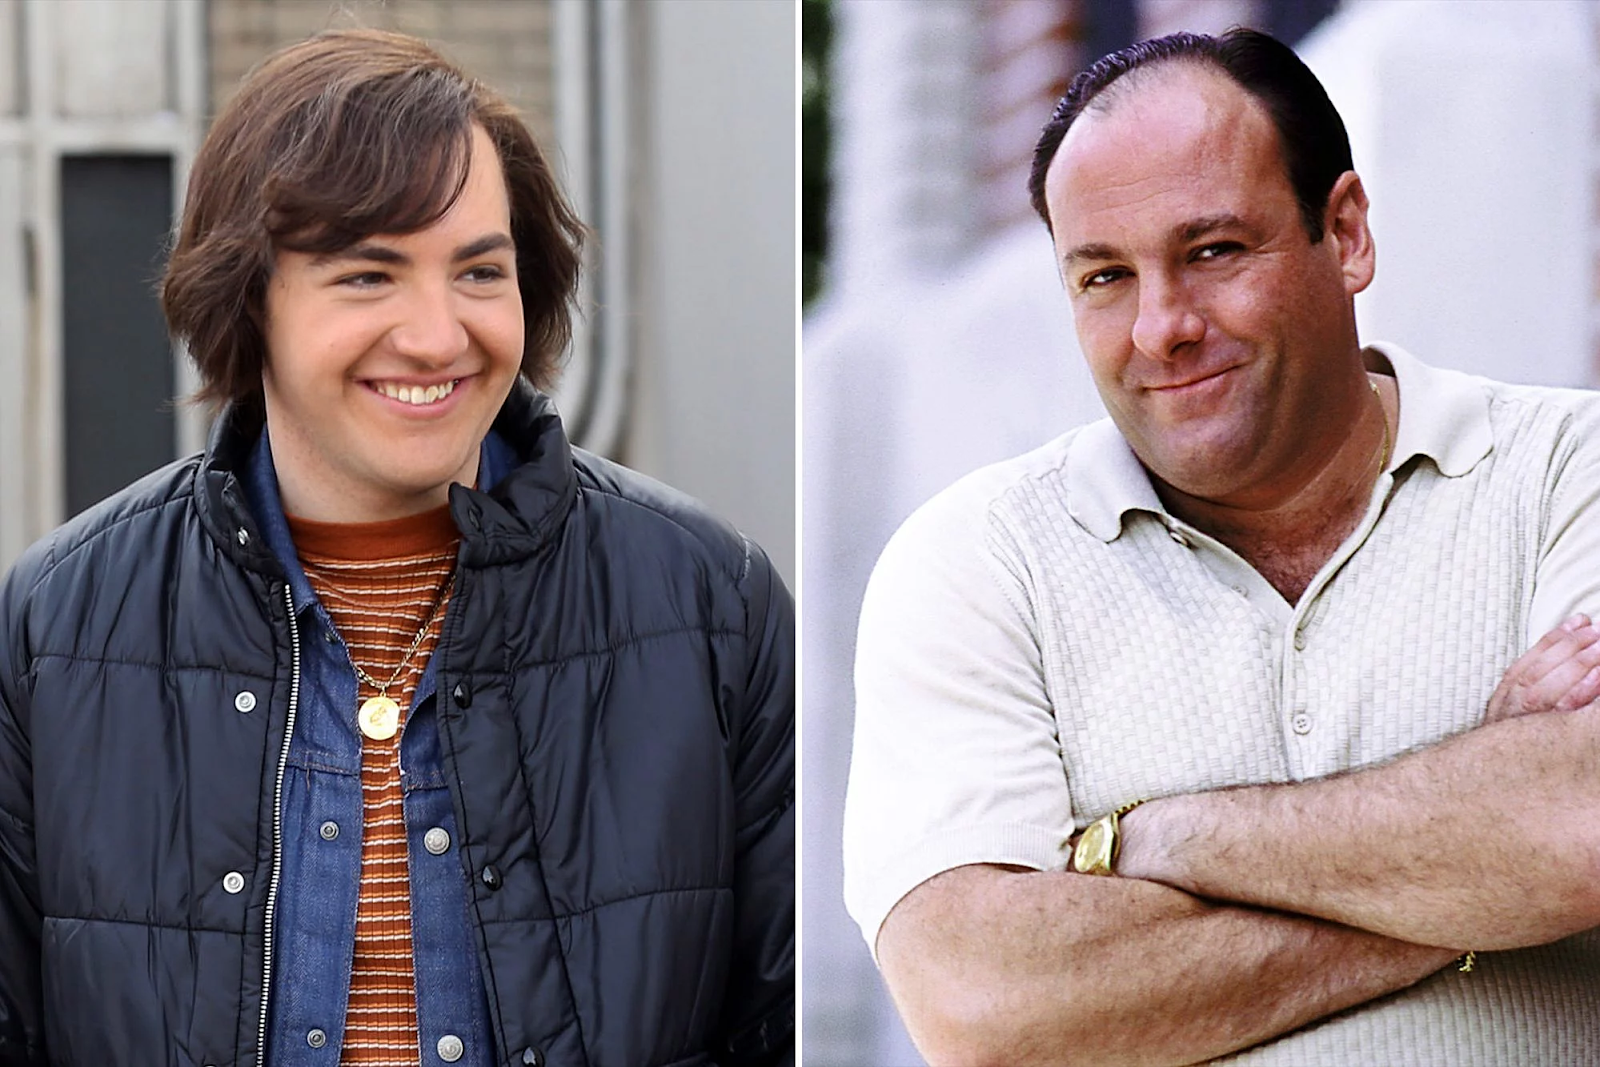 Side-by-side photos of Michael and James Gandolfini